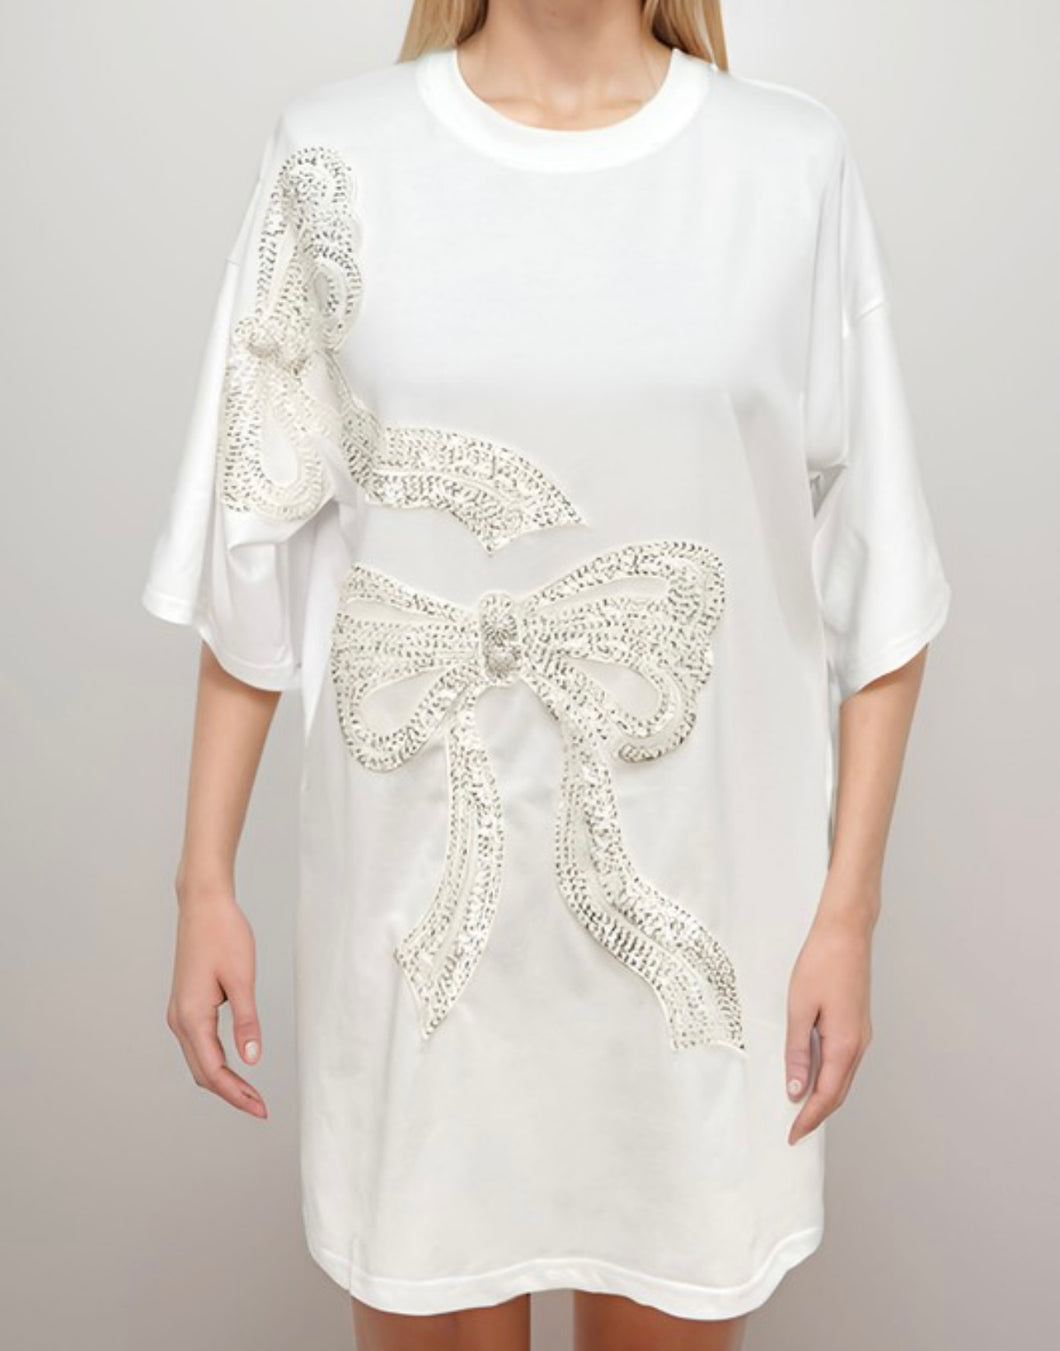 White Sequin Bow Loose Fit Shirt/Dress